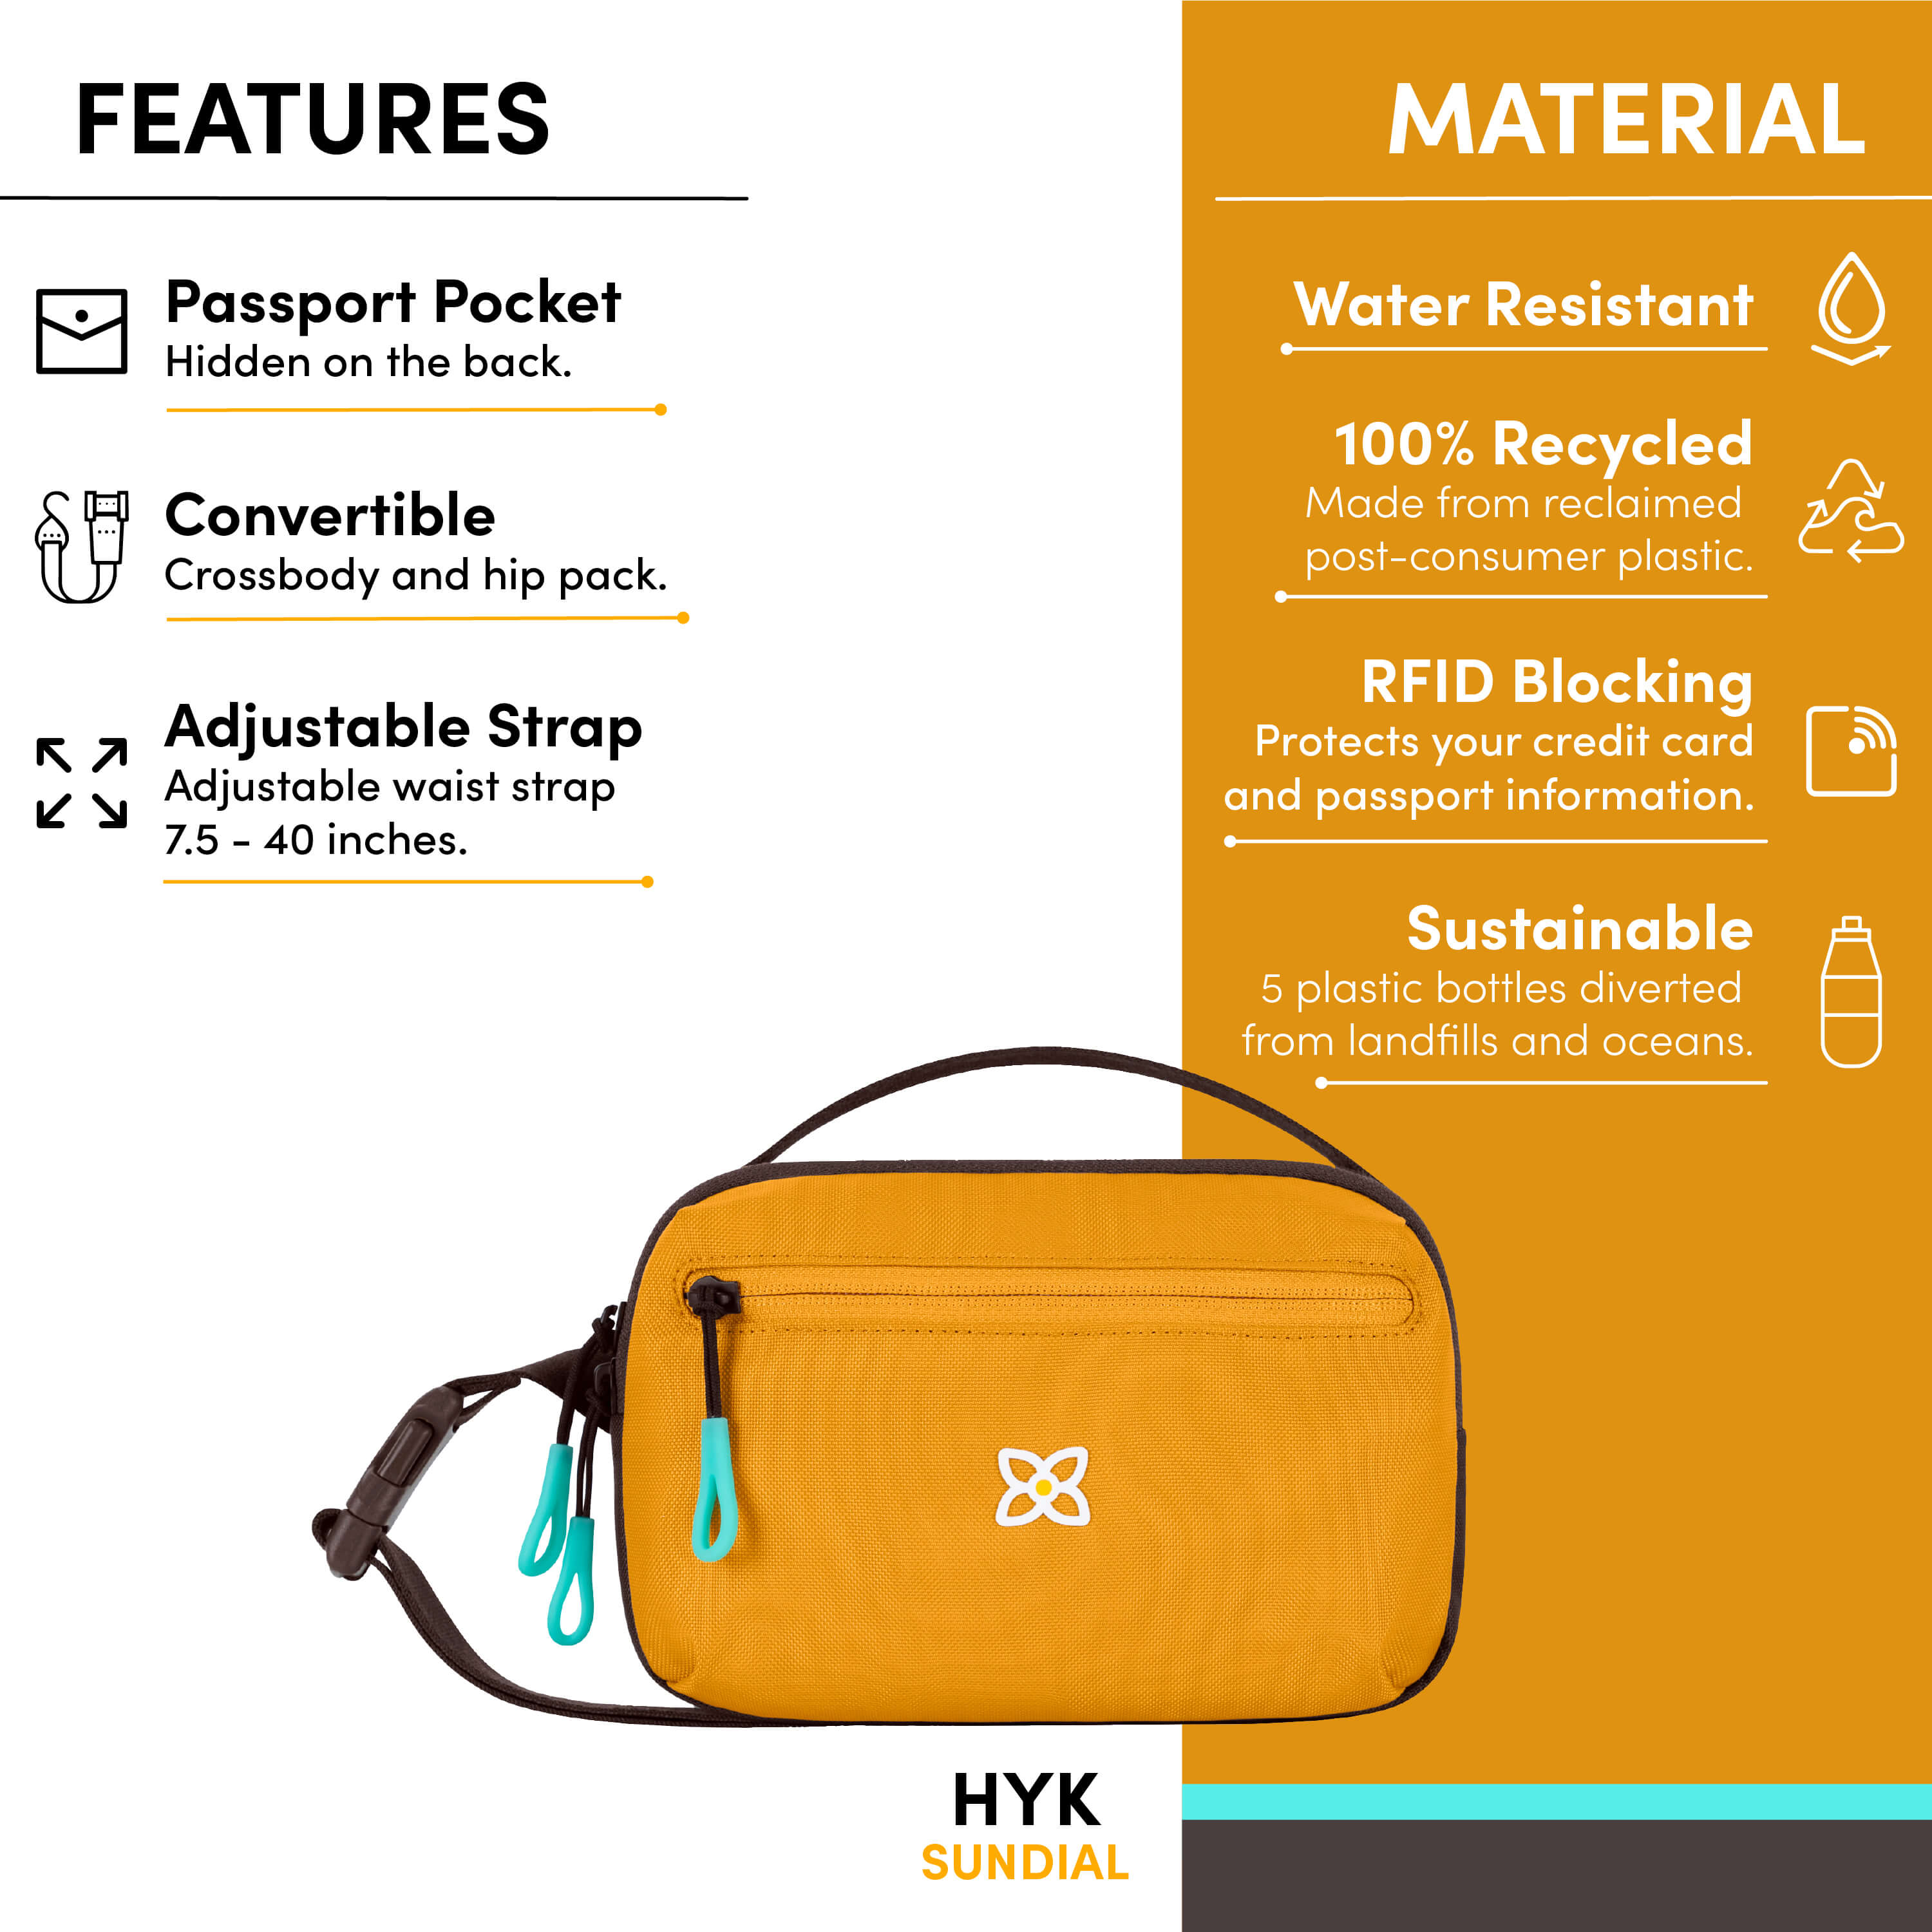 Graphic depicting the following special features of Sherpani mini fanny pack, the Hyk: Passport pocket hidden on the back, convertible bag with dual functionality (belt bag or mini crossbody), adjustable waist strap, water-resistant material, RFID protection and sustainably made from repurposed plastic bottles. 